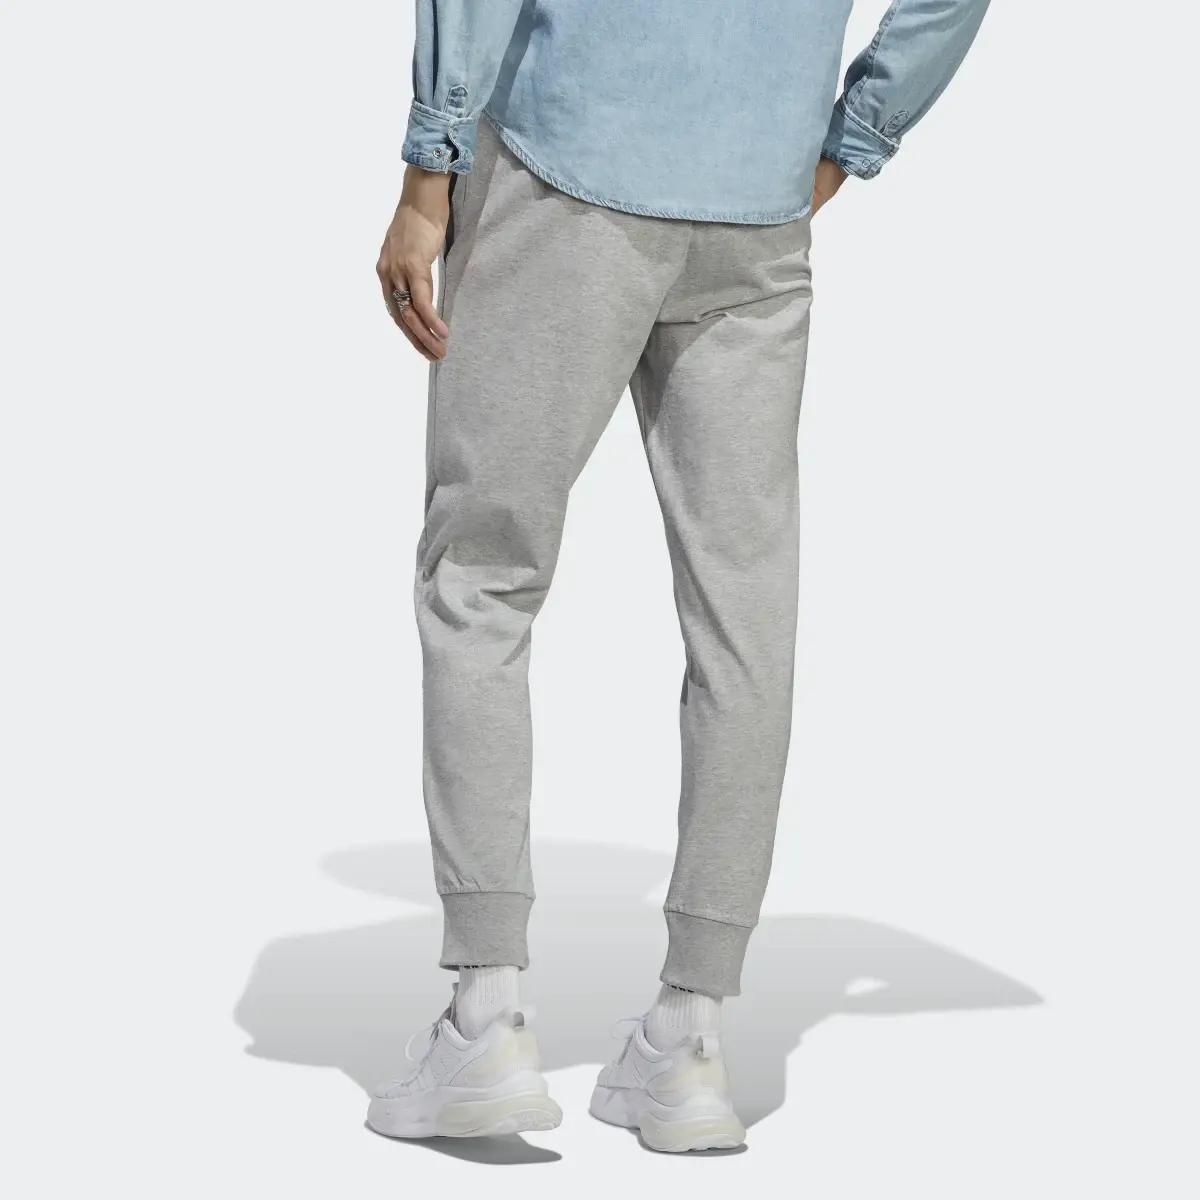 Adidas Essentials Single Jersey Tapered Cuff Pants. 2